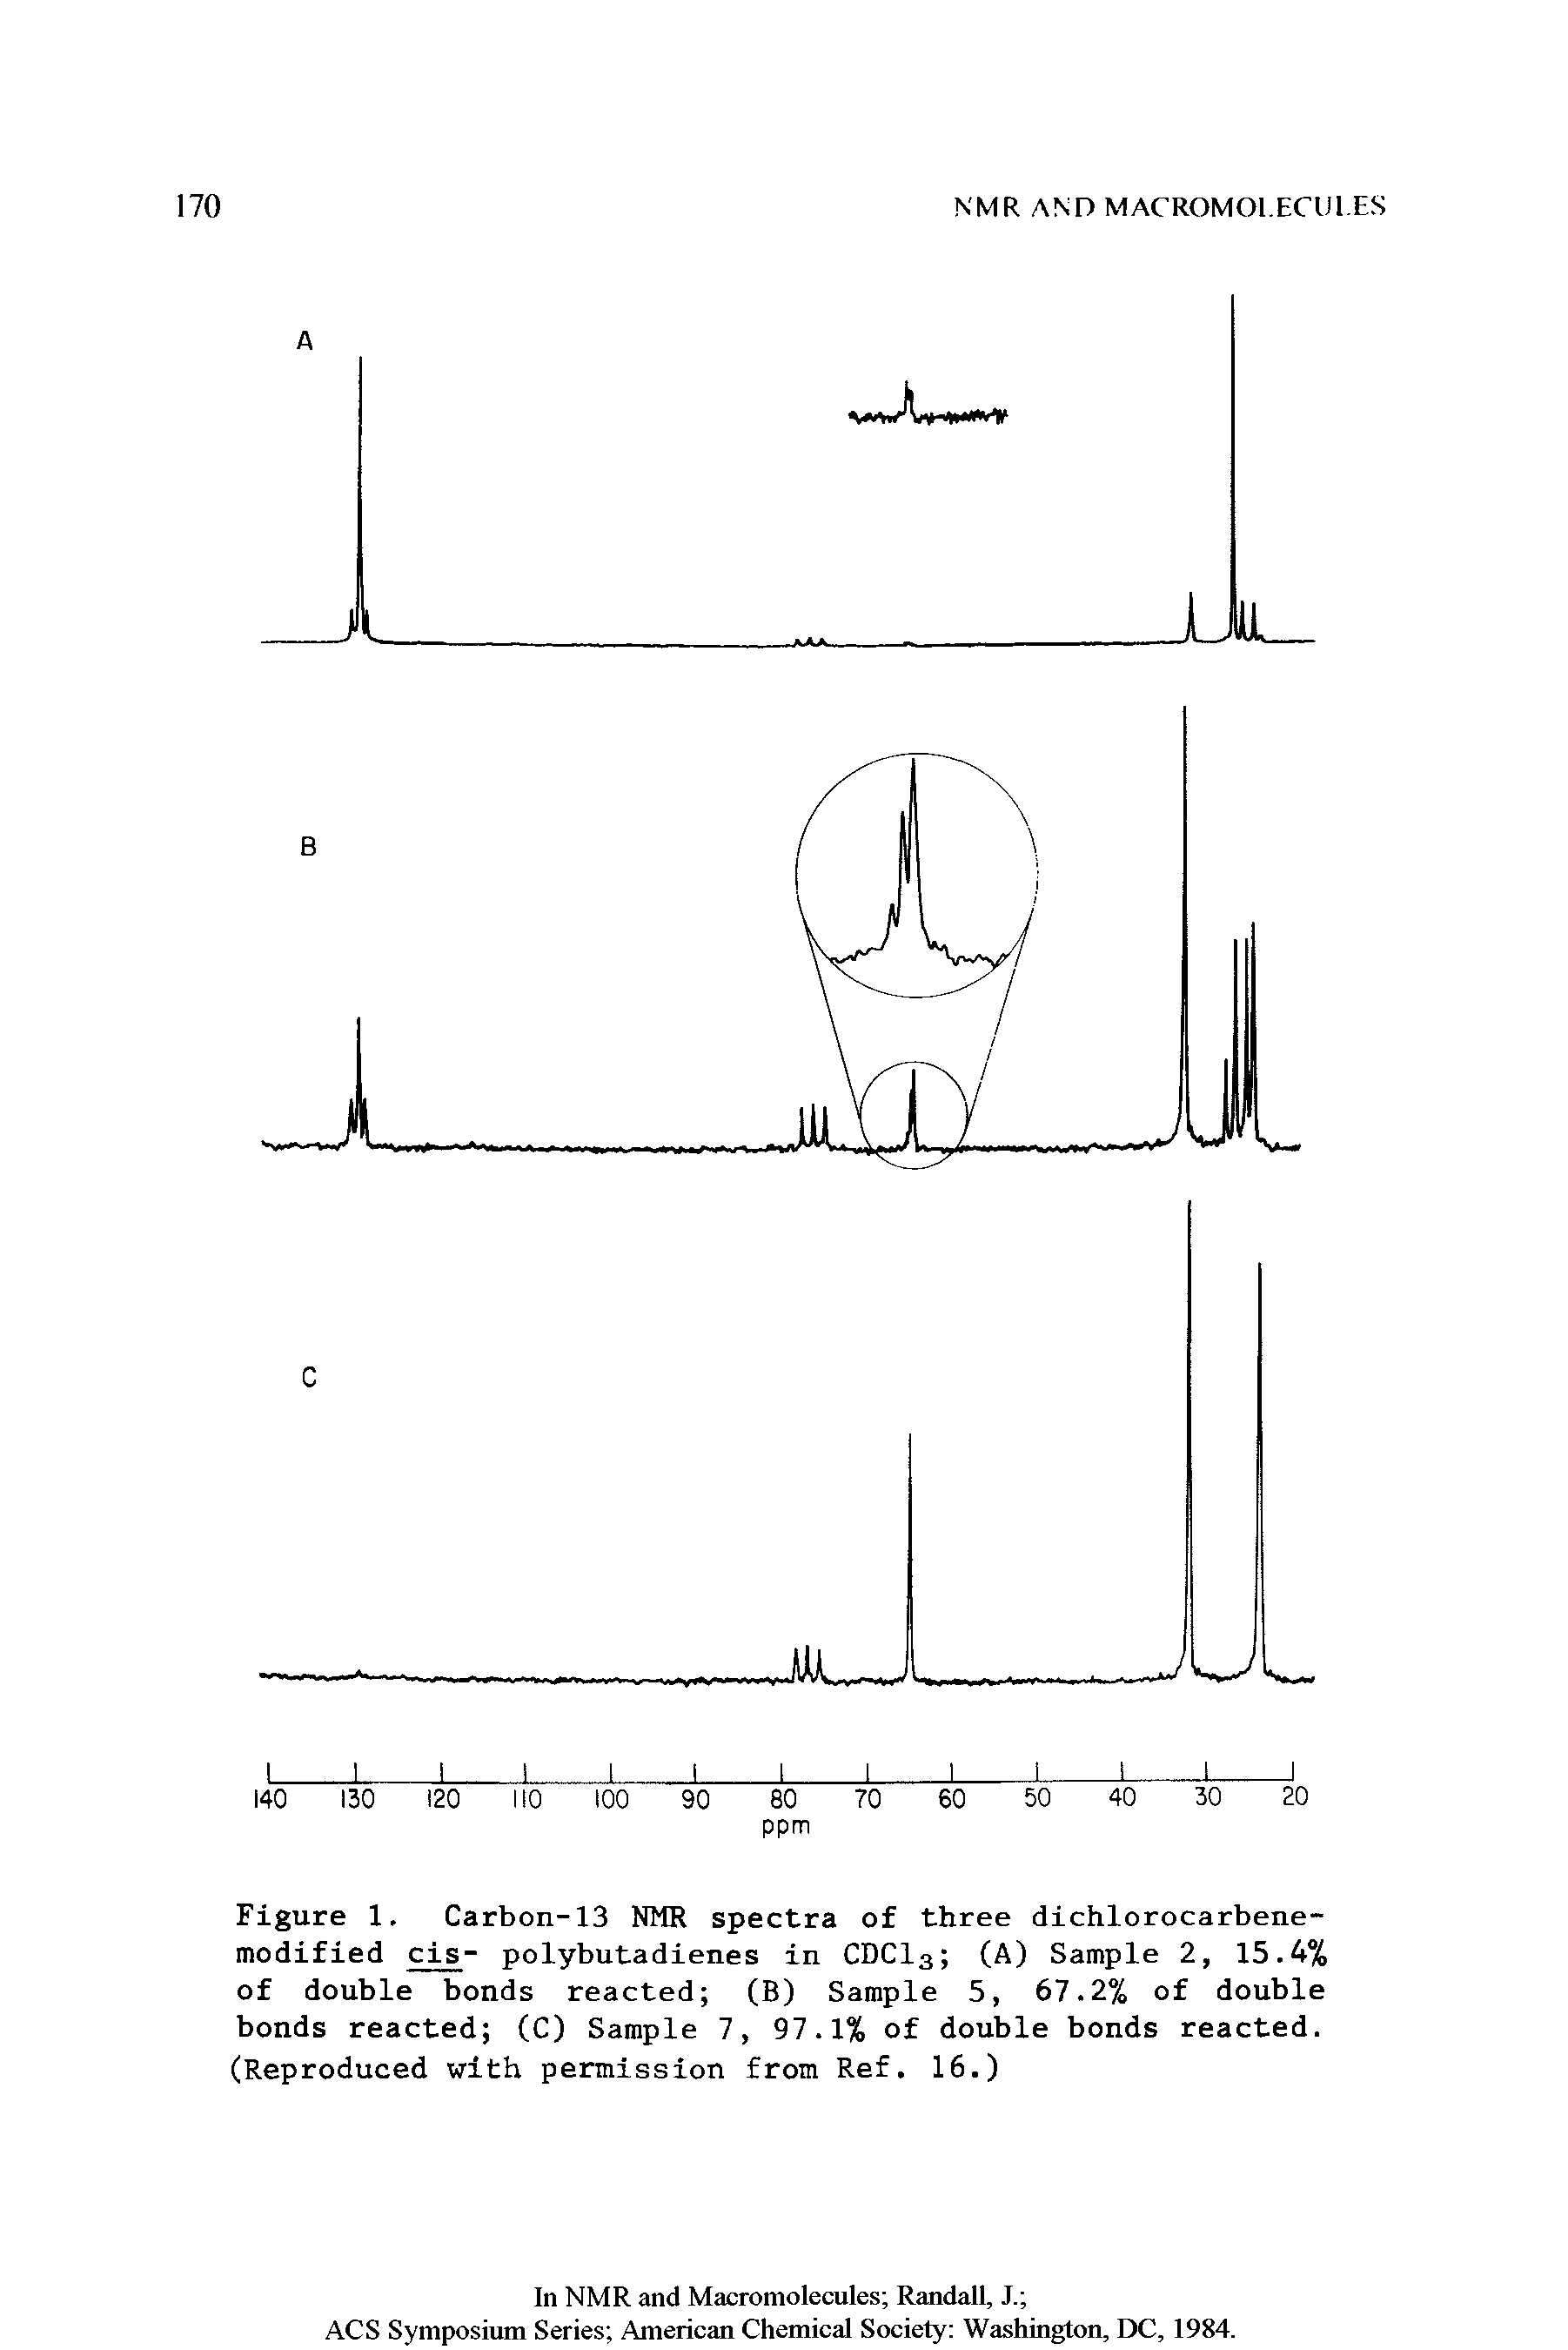 Figure 1. Carbon-13 NMR spectra of three dichlorocarbene-modified cis- polybutadienes in CDC13 (A) Sample 2, 15.4% of double bonds reacted (B) Sample 5, 67.2% of double bonds reacted (C) Sample 7, 97.1% of double bonds reacted. (Reproduced with permission from Ref. 16.)...